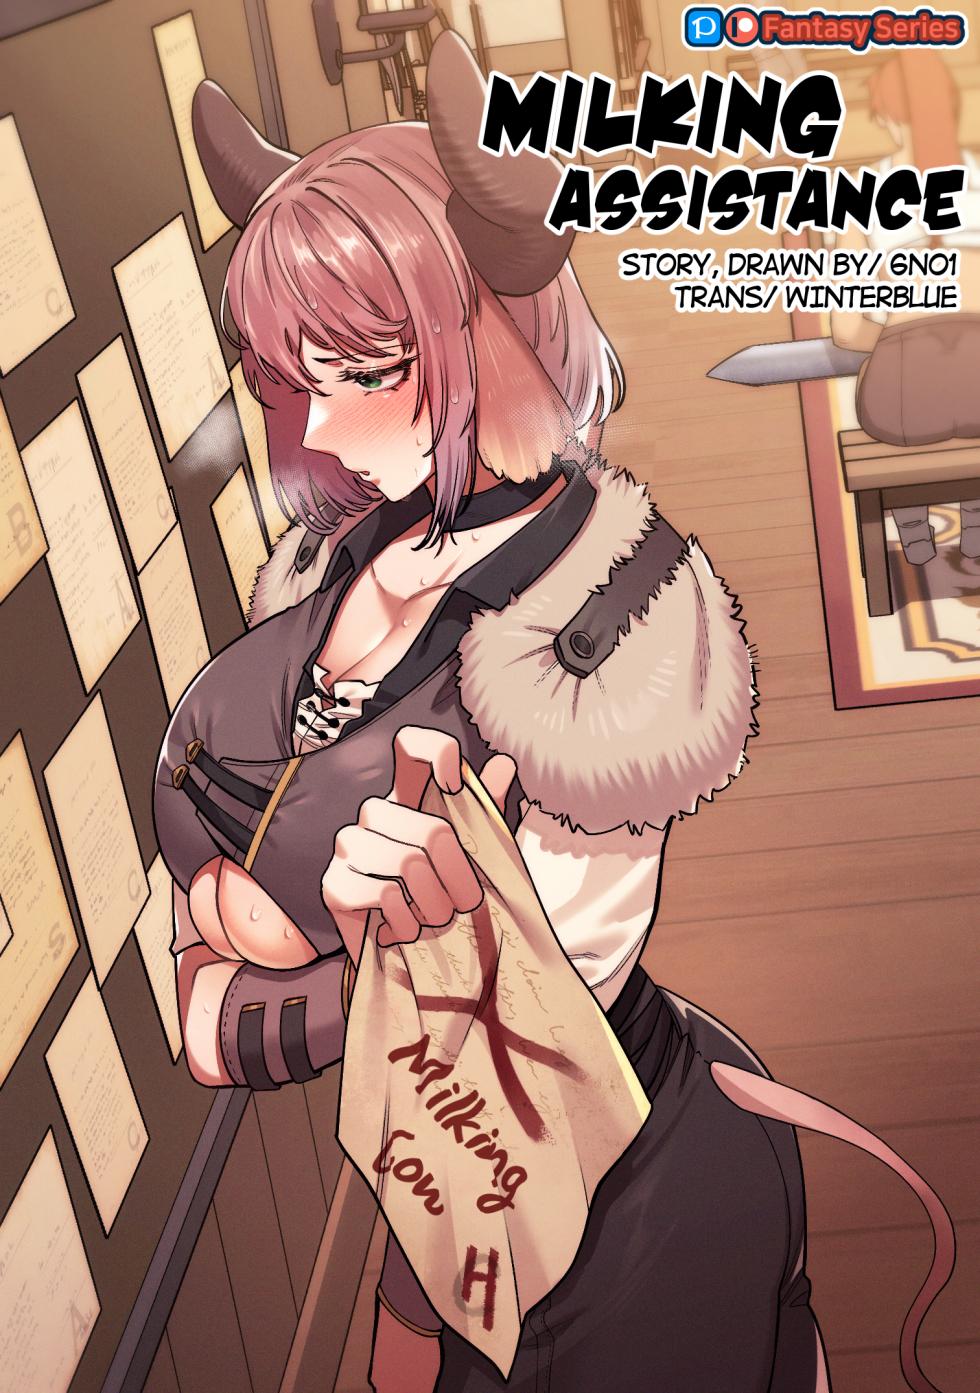 [6no1] Milking Assistance (22.03) [English] [Uncensored] - Page 1